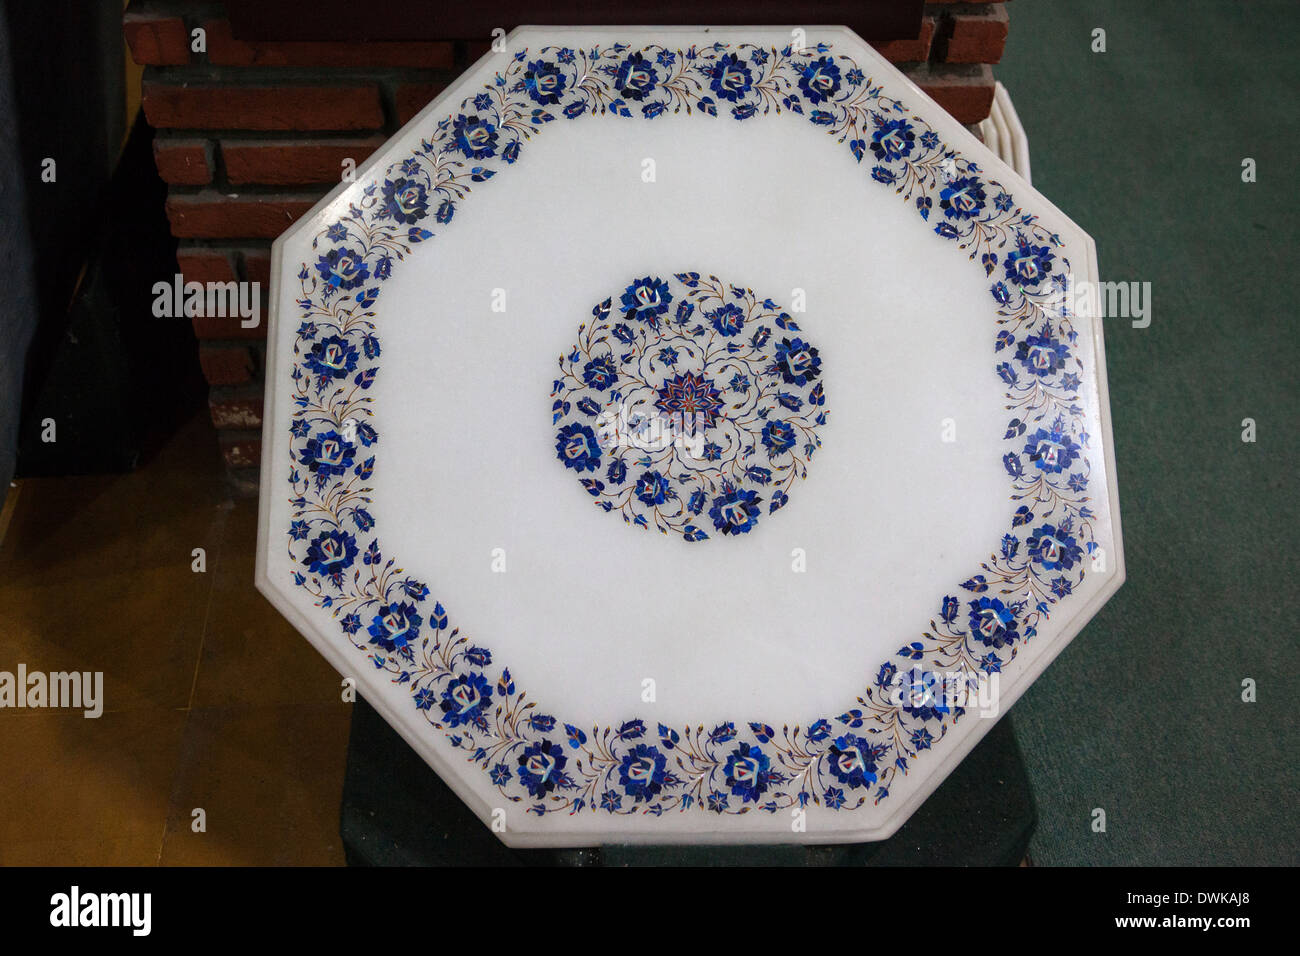 Agra, India. A Decorative Plate with an Inlaid Design of Semi-precious Stone. Stock Photo